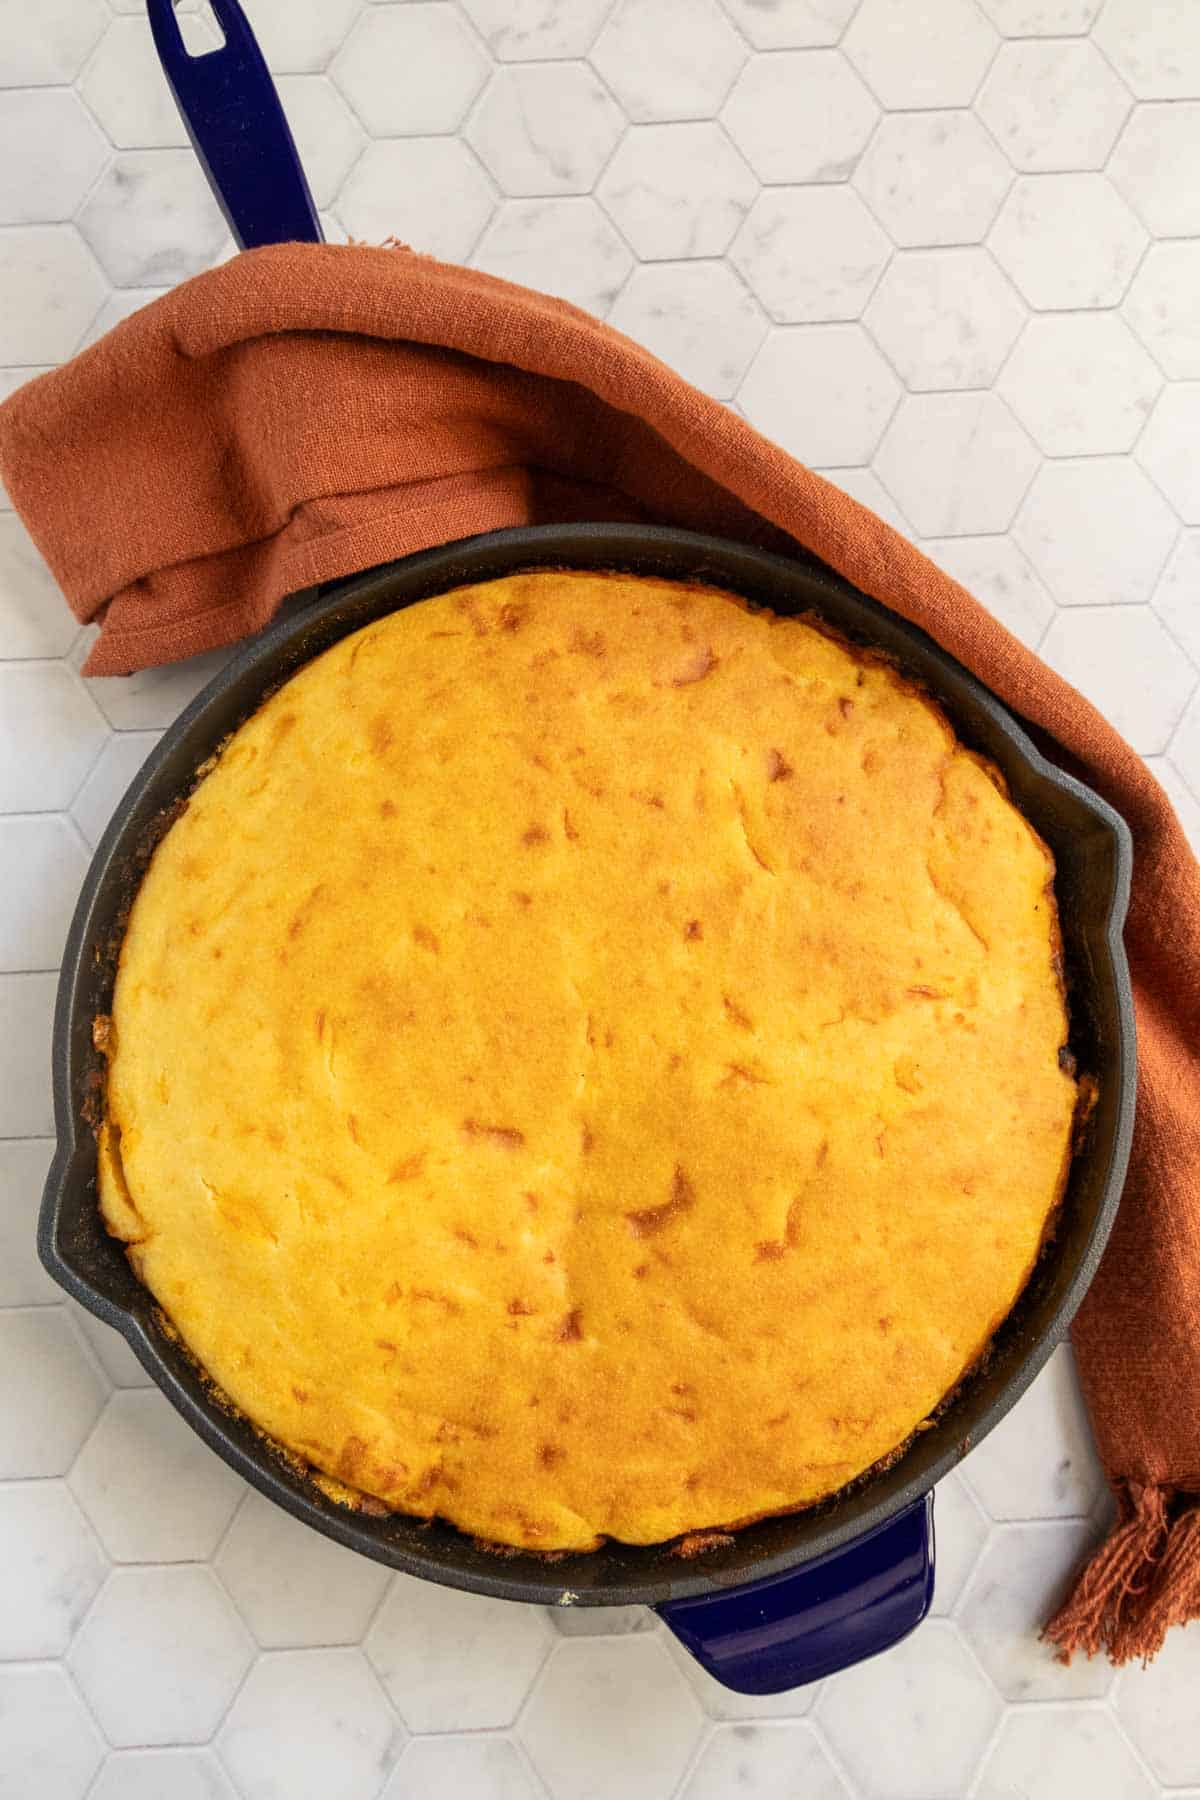 A freshly baked cornbread in a cast-iron skillet with a kitchen towel on the side.